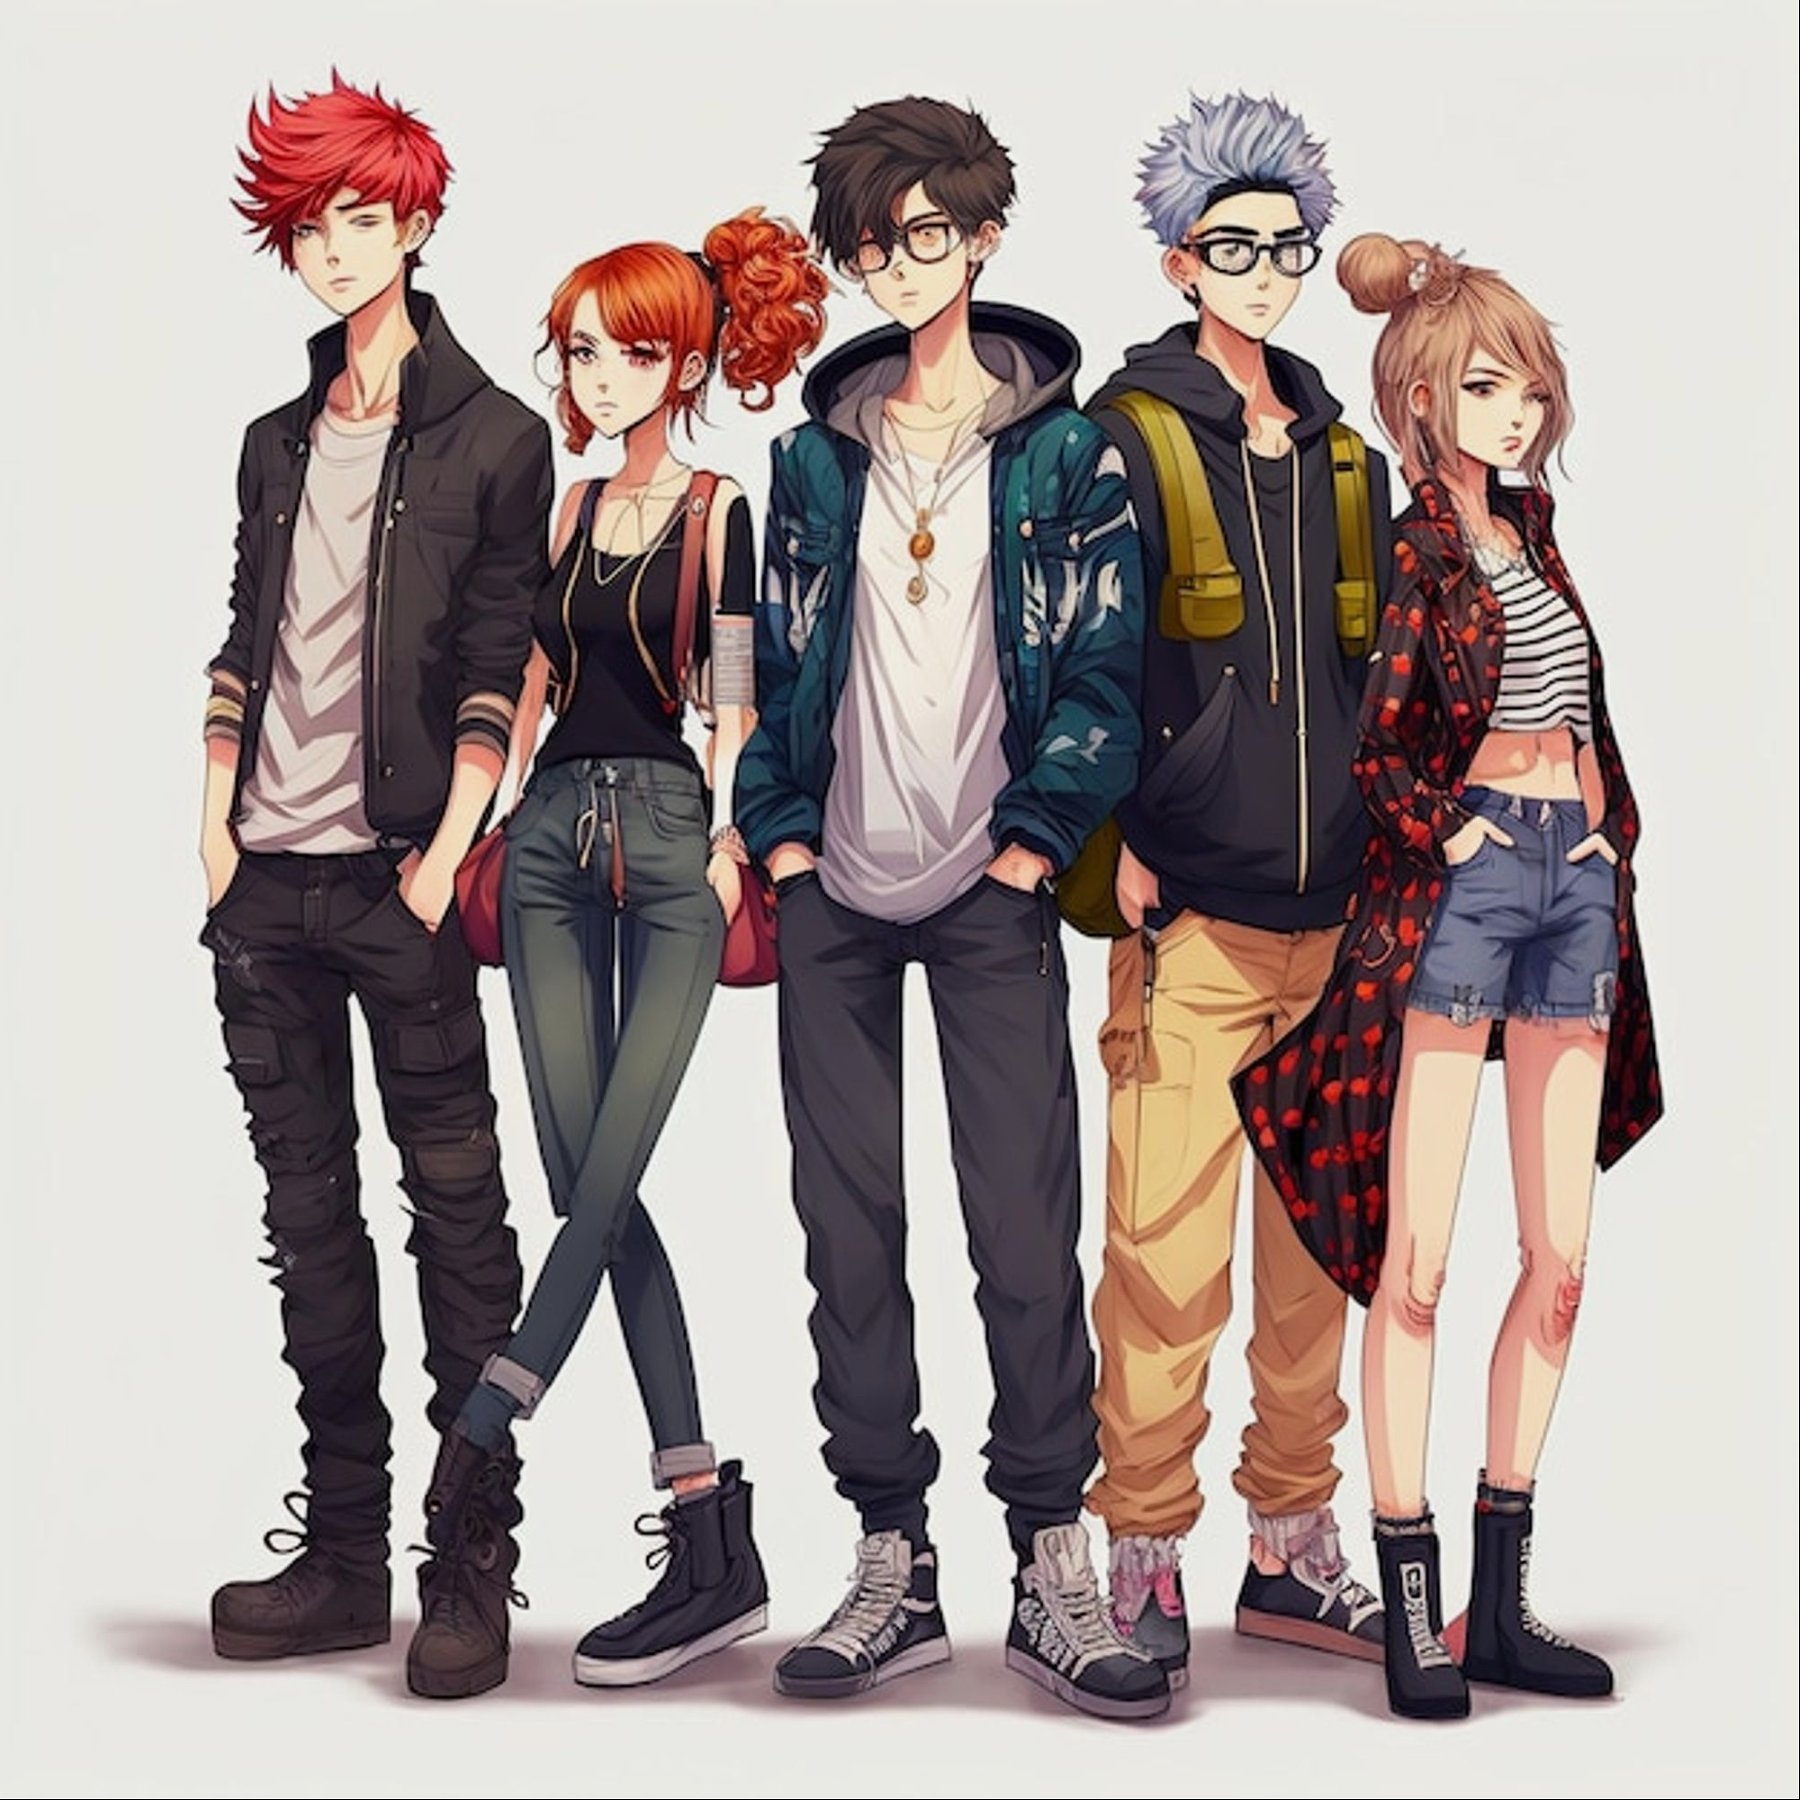 Embracing Anime Fashion: The Rising Popularity of Anime-Inspired Style Among Men